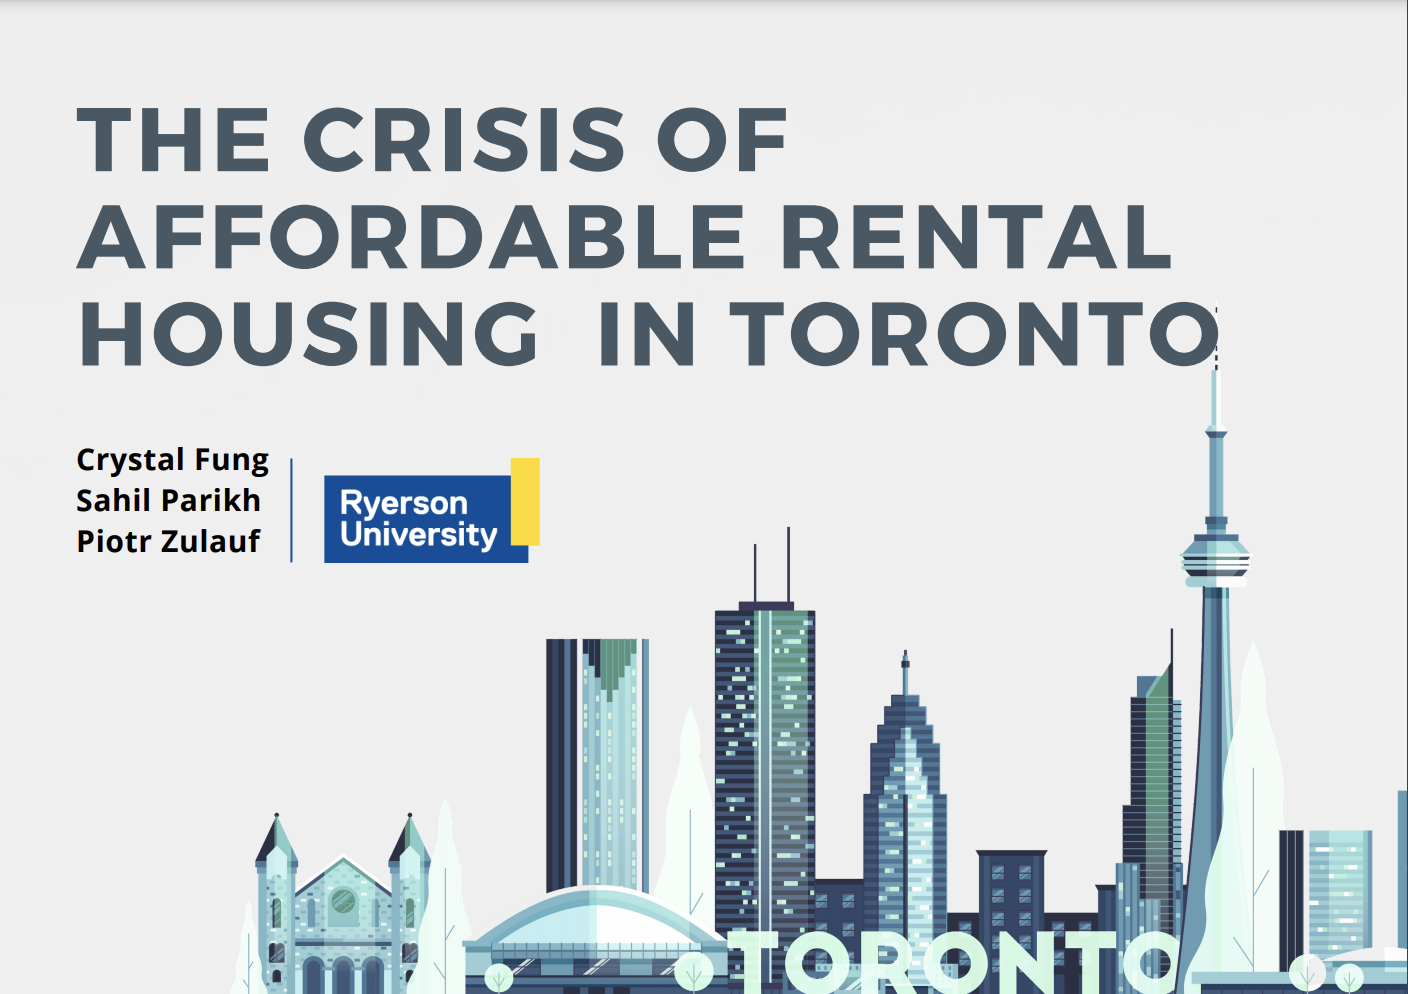 RYERSON UNIVERSITY: THE CRISIS OF AFFORDABLE RENTAL HOUSING IN TORONTO